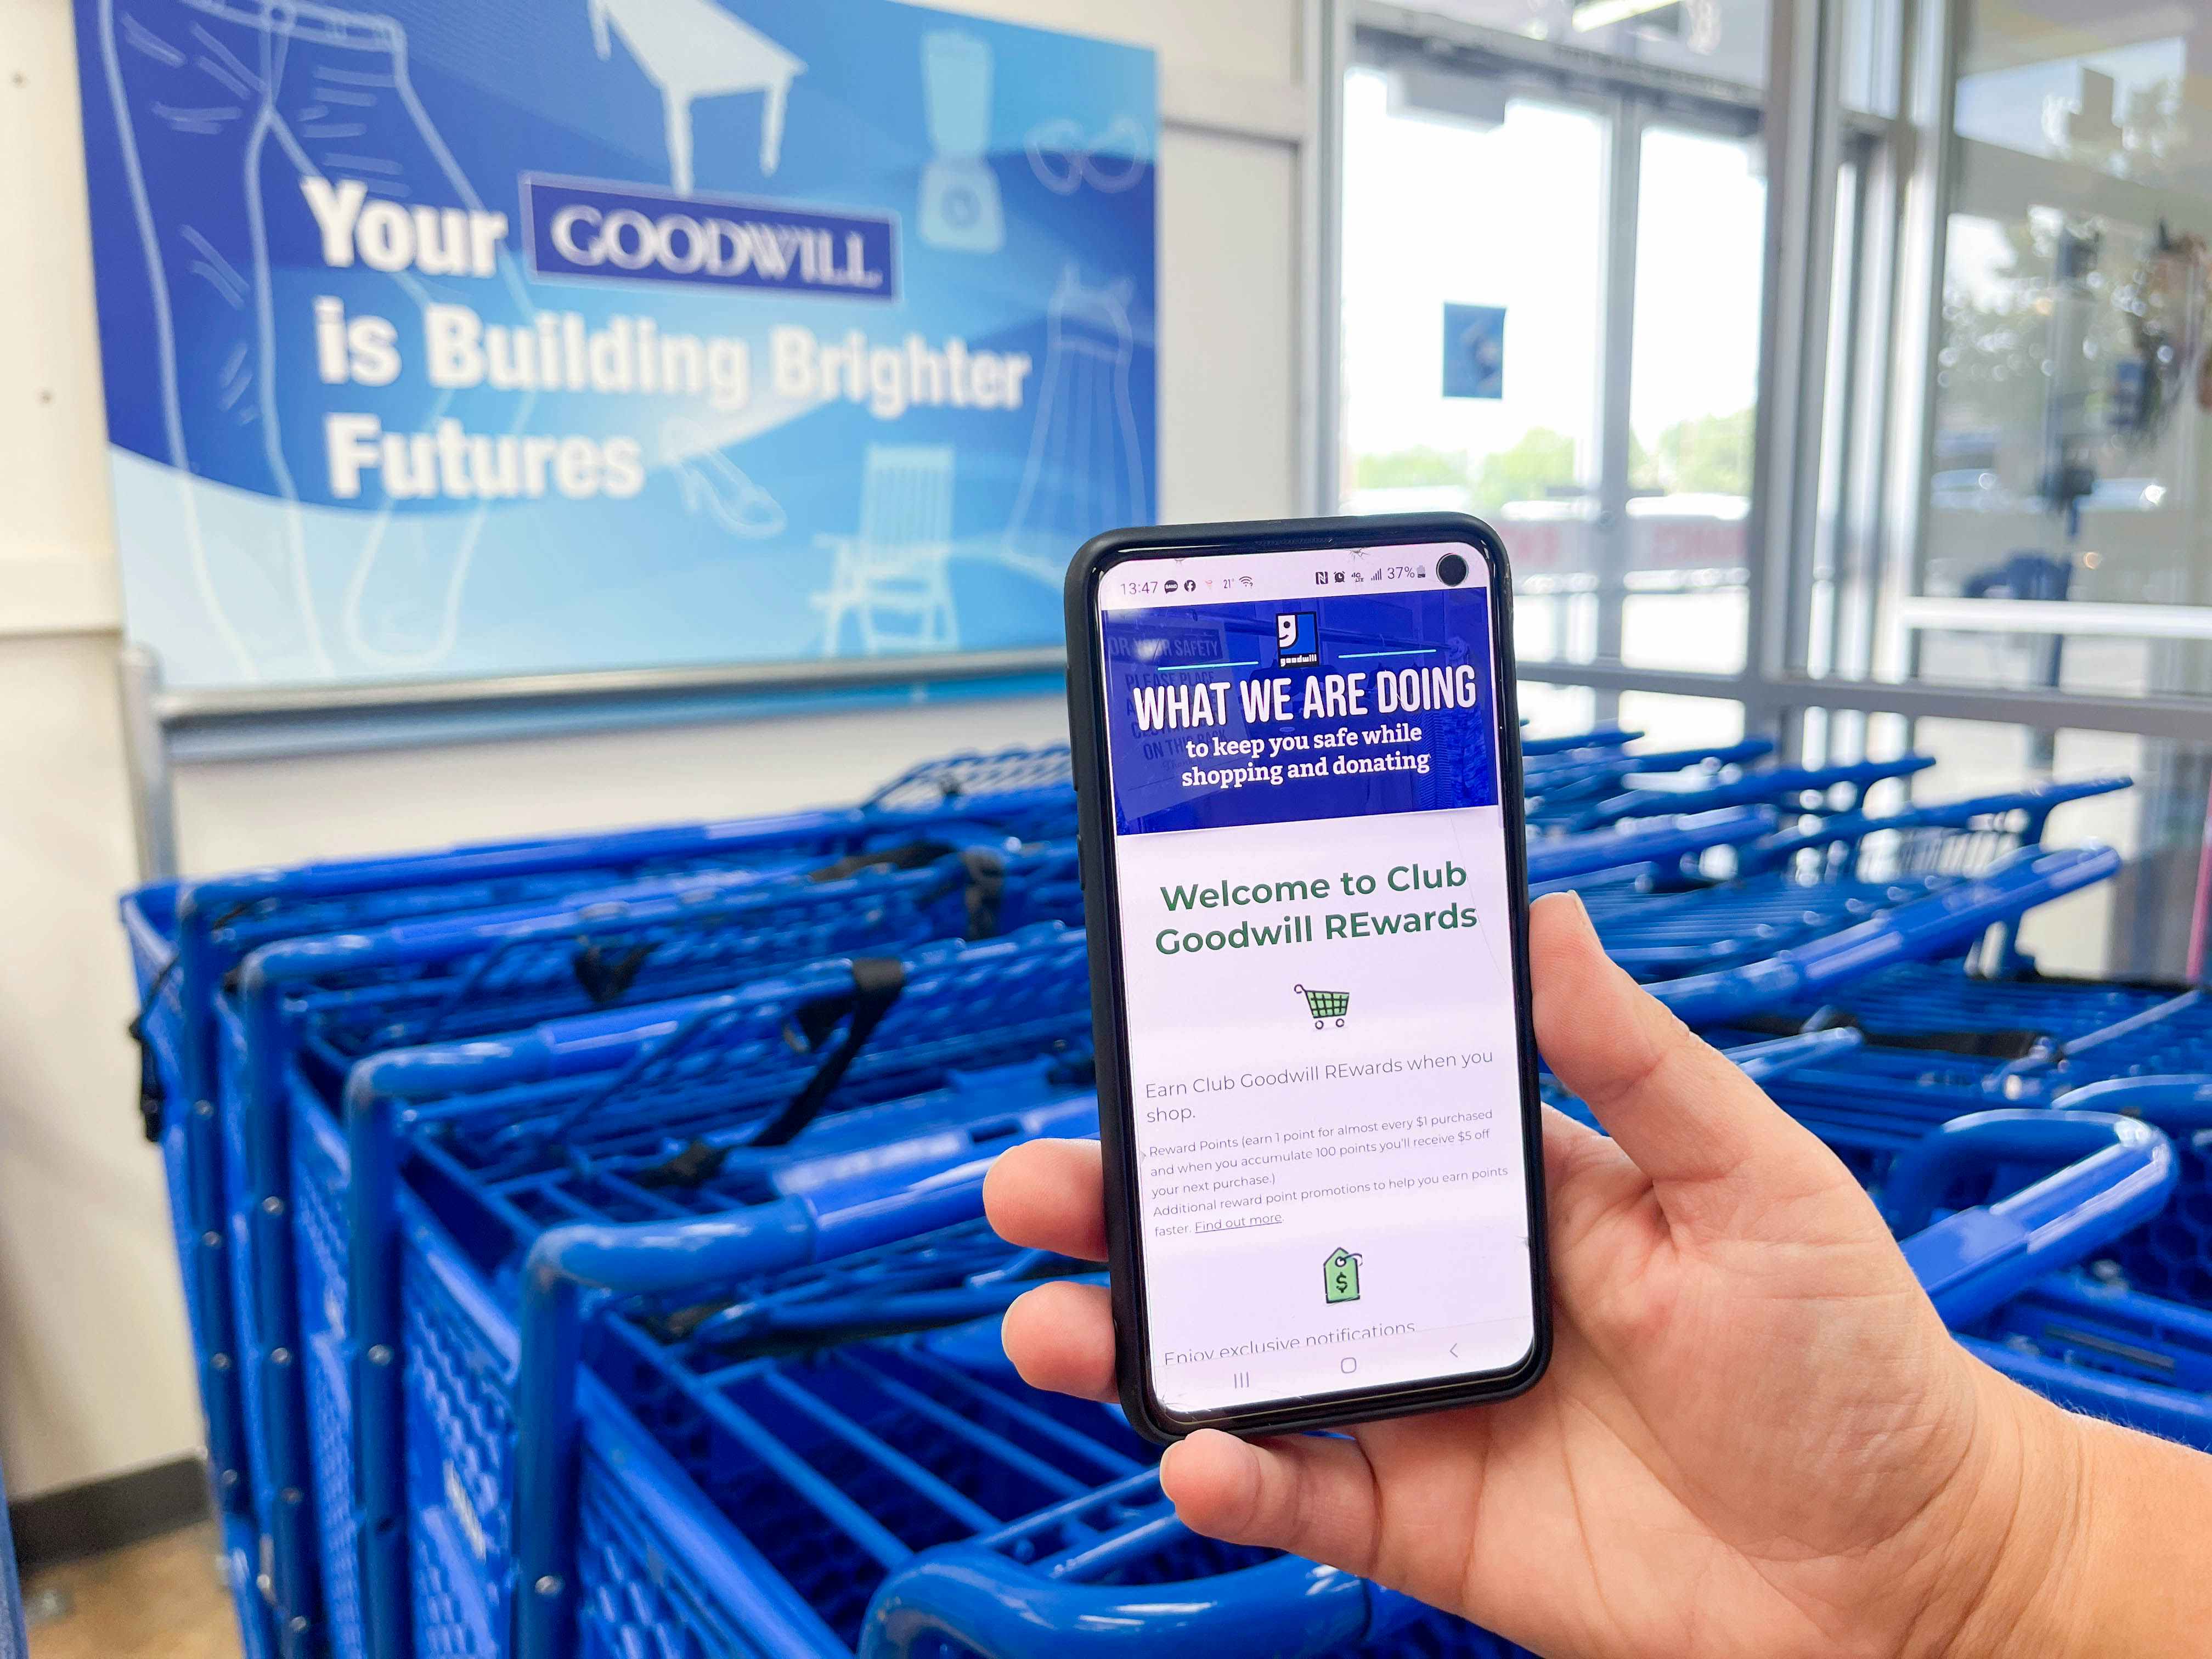 goodwill loyalty program info on cellphone being held in front of carts